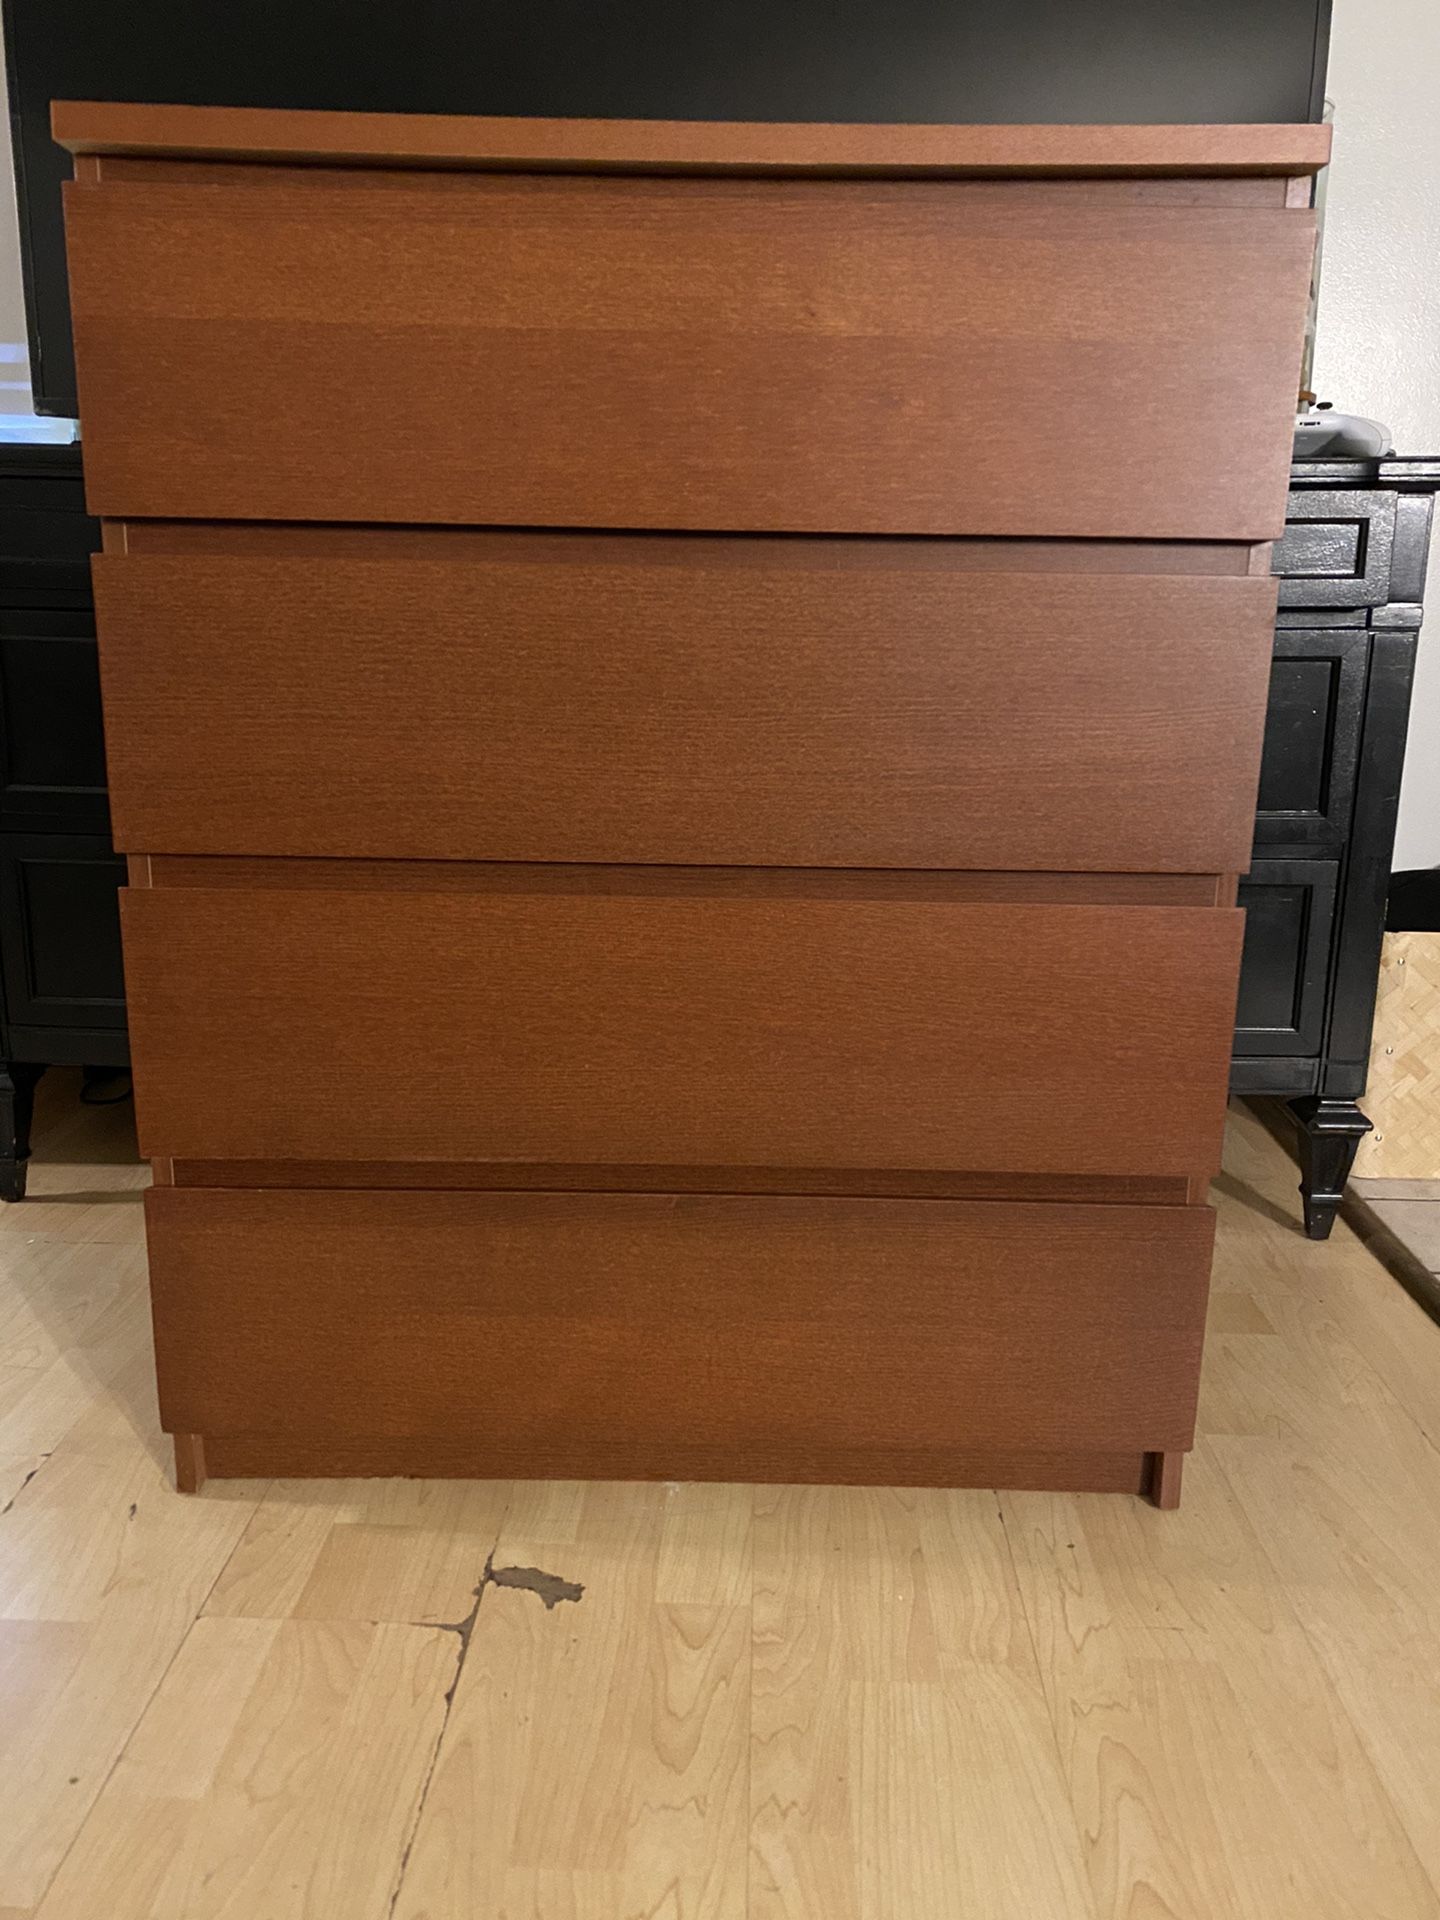 IKEA MALM 4-drawer chest, brown stained ash veneer